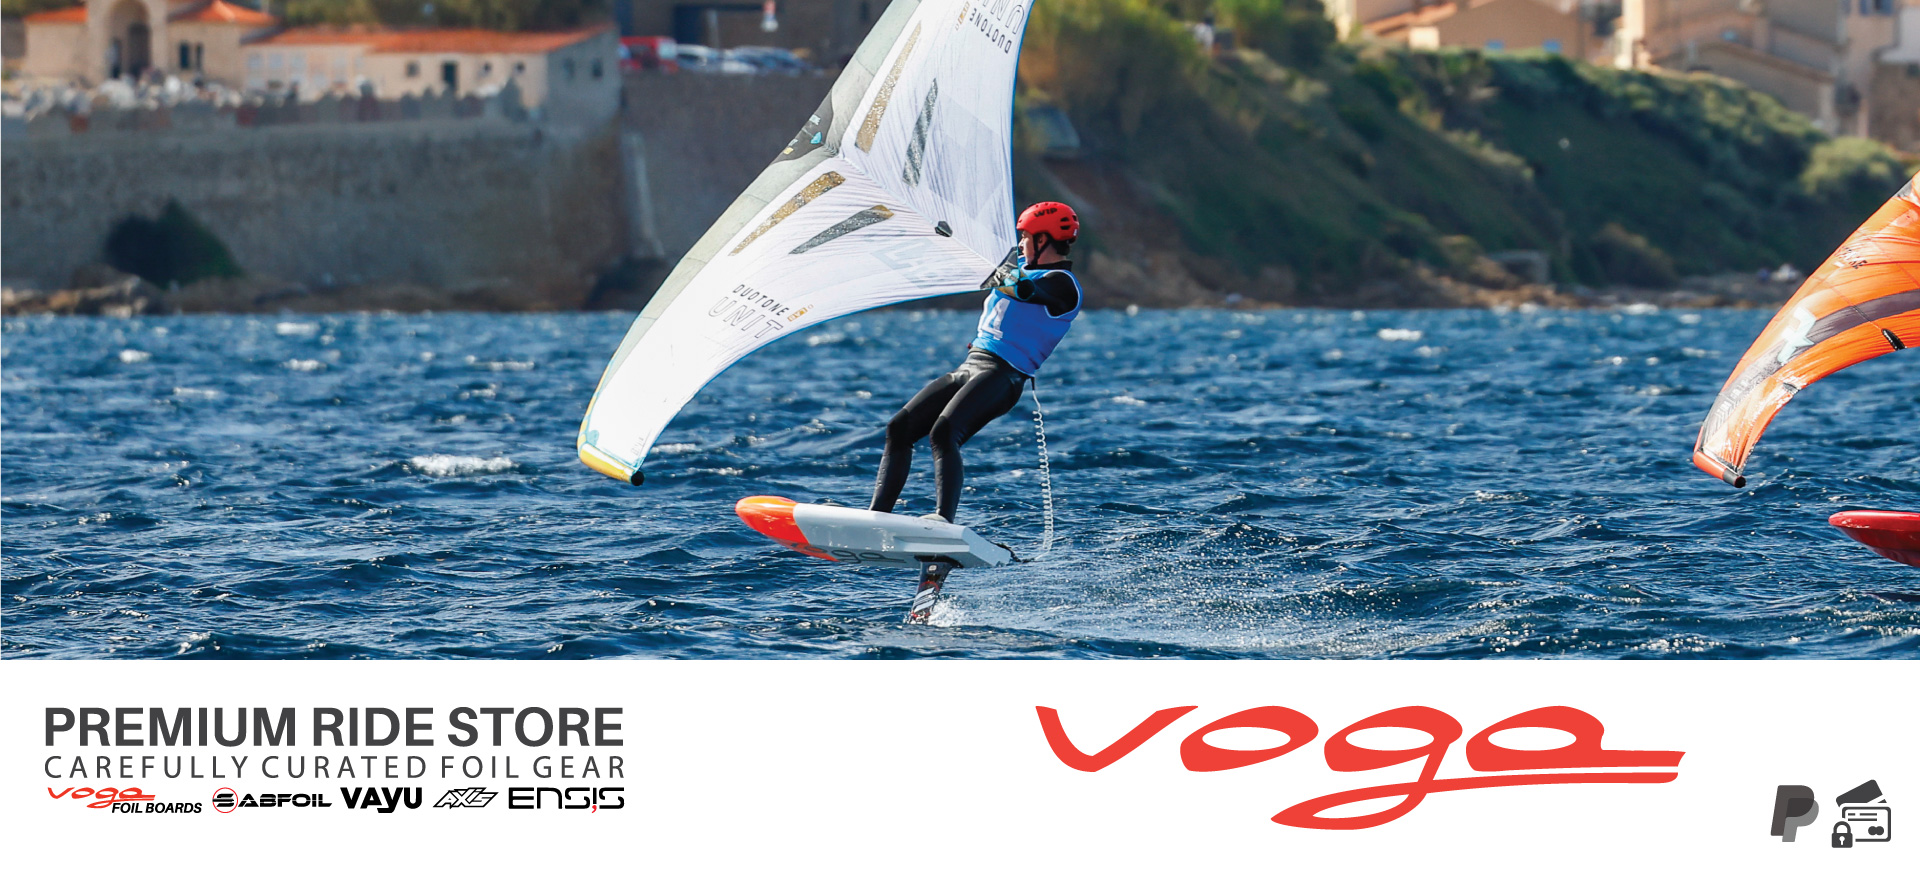 Voga Premium Ride Store race wing foil boards for speed sailing